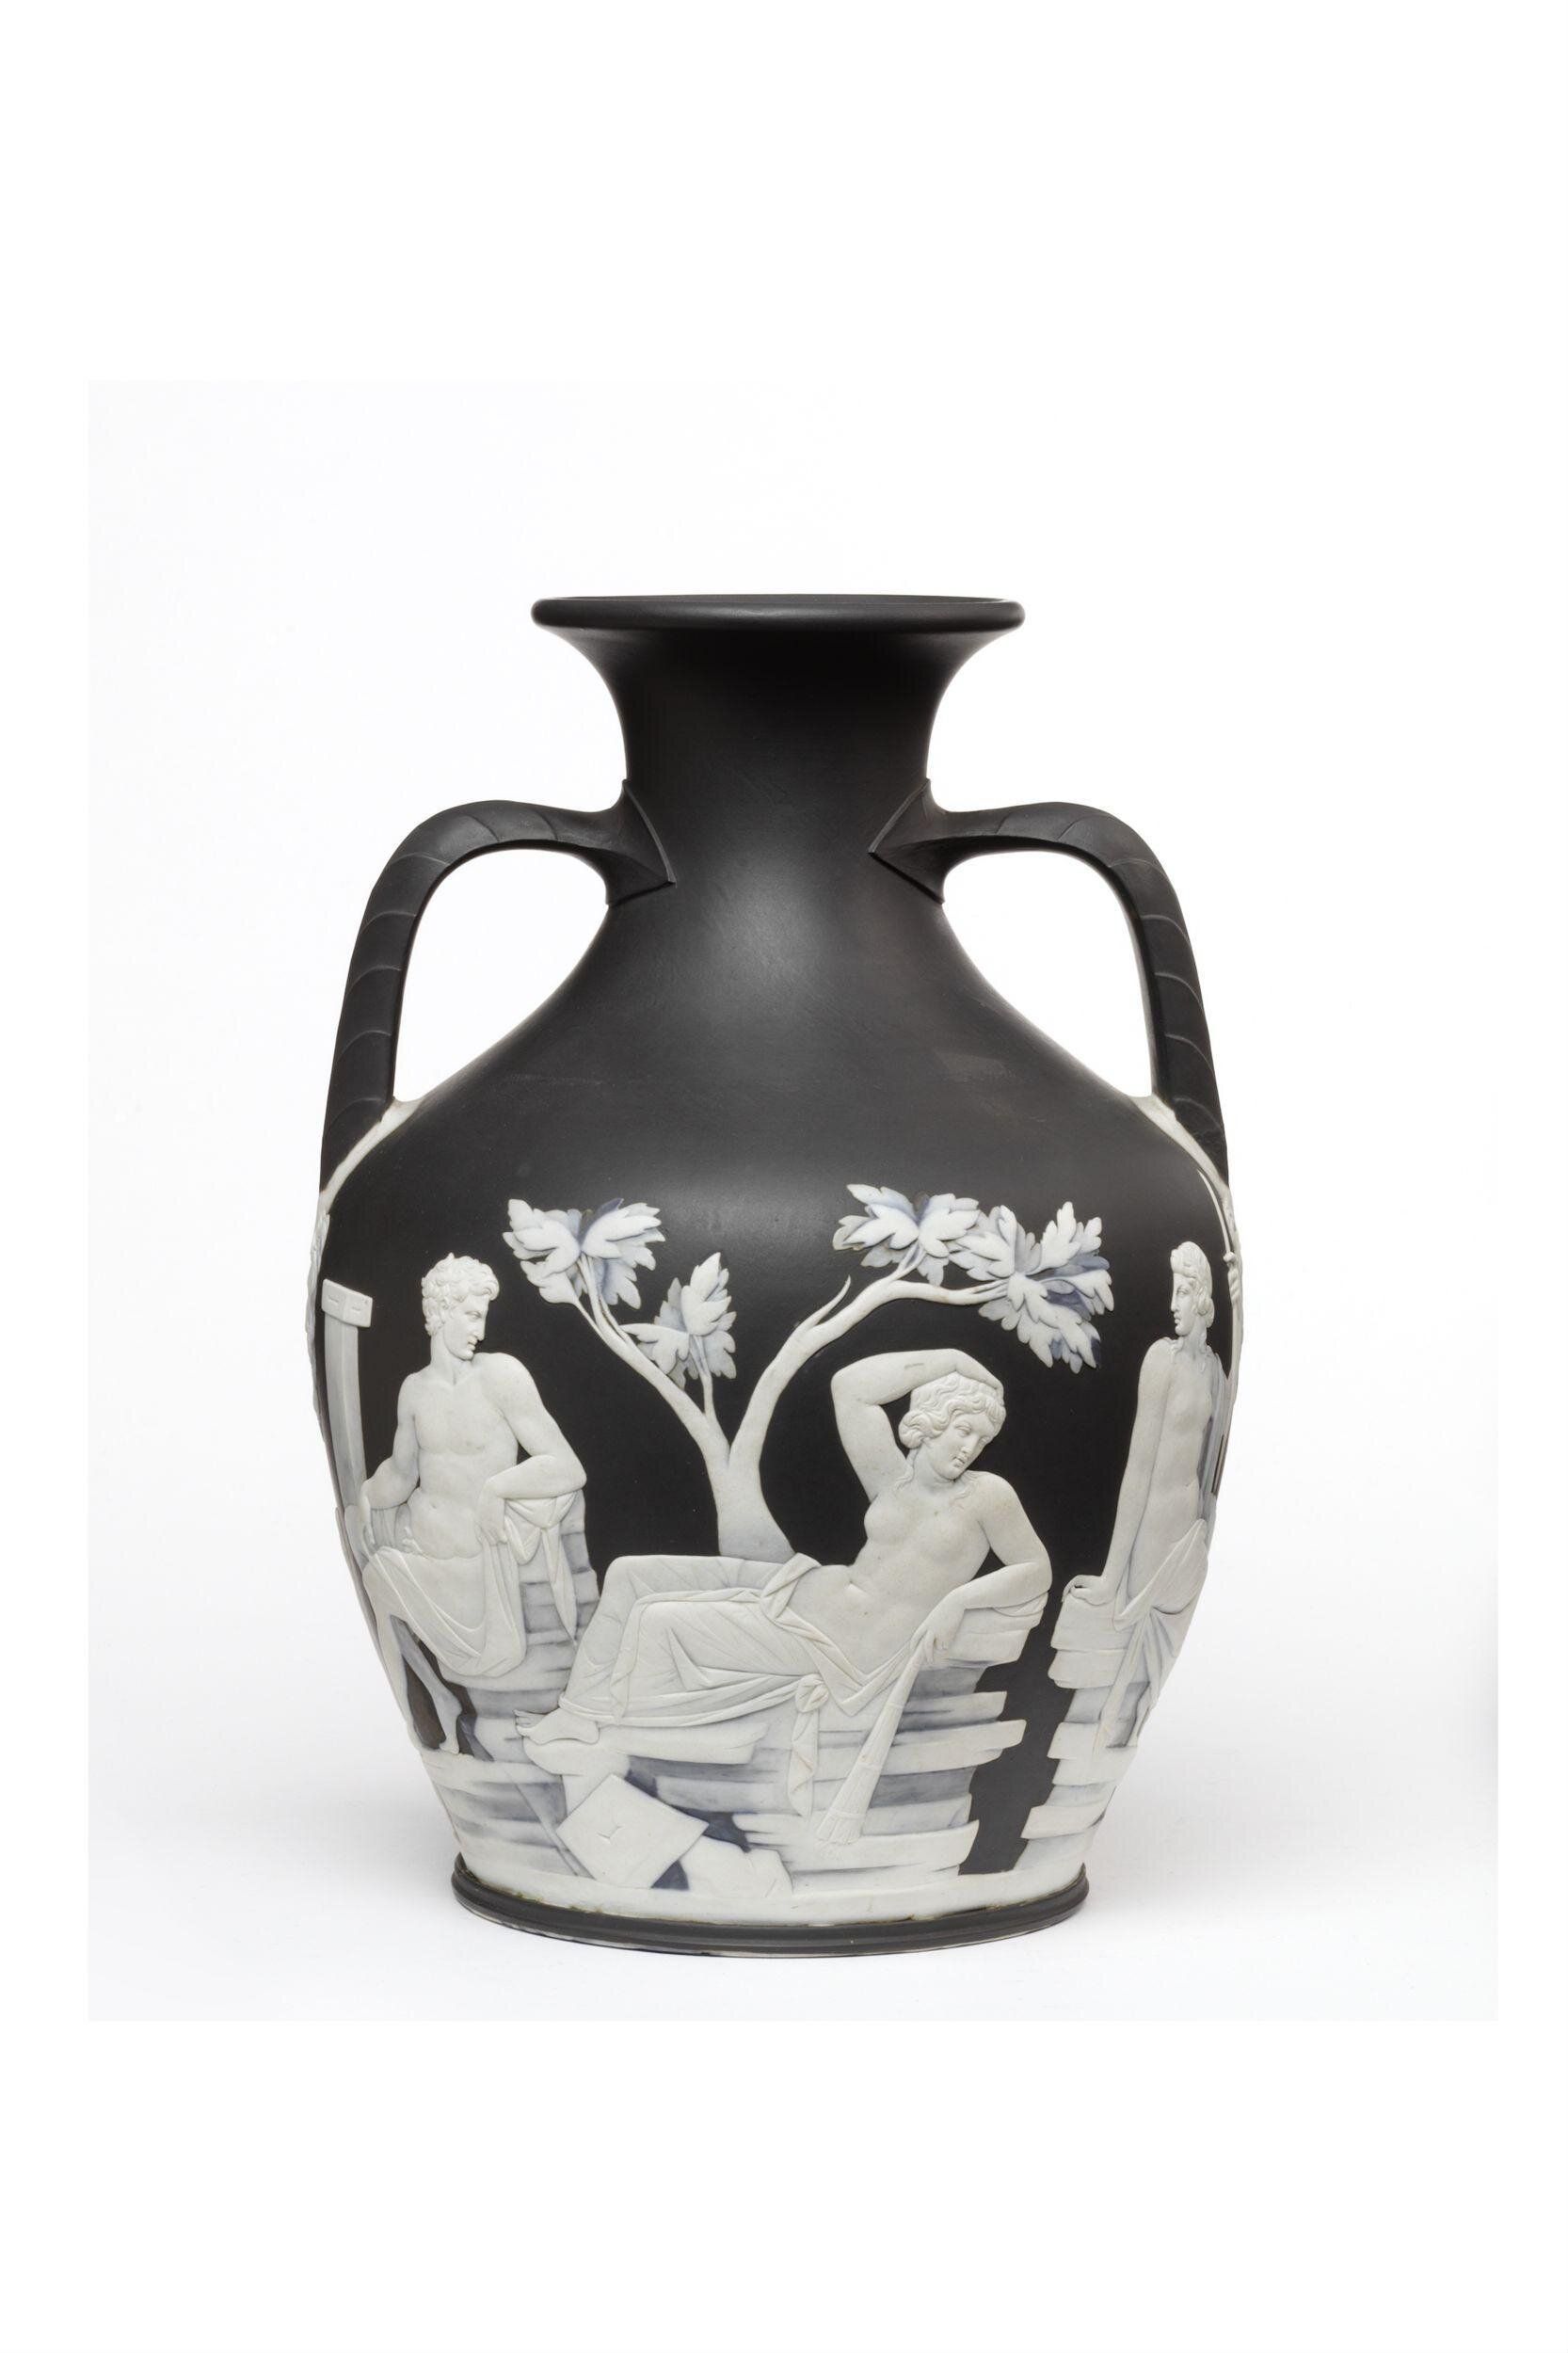 Josiah Wedgwood's Portland Vase, ca.1840-60.  He made many editions of the Vase.  This is the first edition. The Victoria & Albert Museum. 